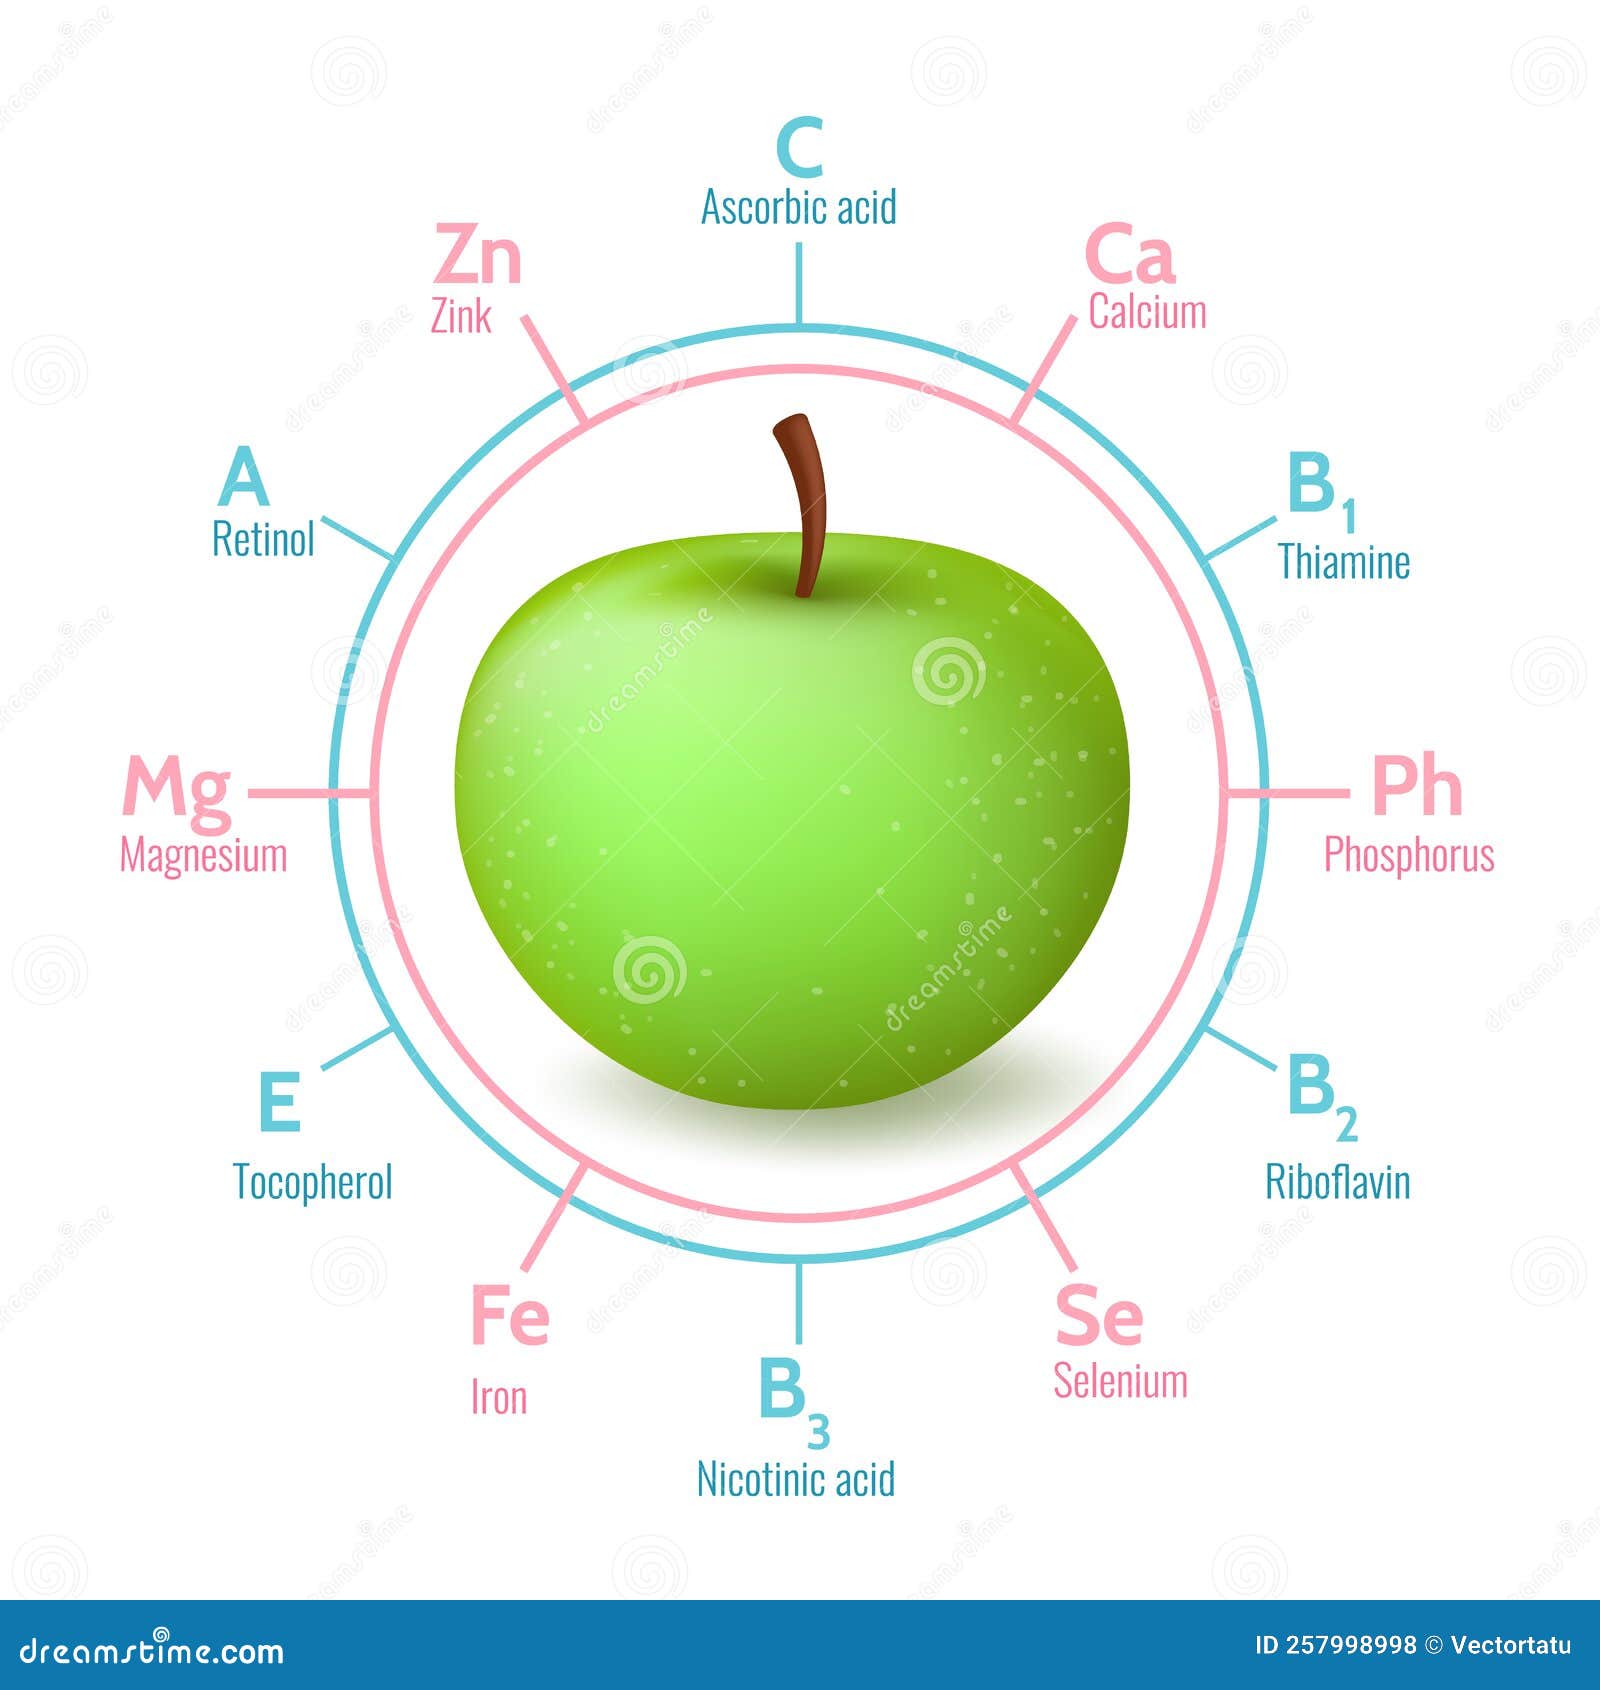 https://thumbs.dreamstime.com/z/apples-benefits-infographic-green-apple-fruit-benefit-infographics-facts-isolated-white-background-nutrients-medical-vitamin-257998998.jpg